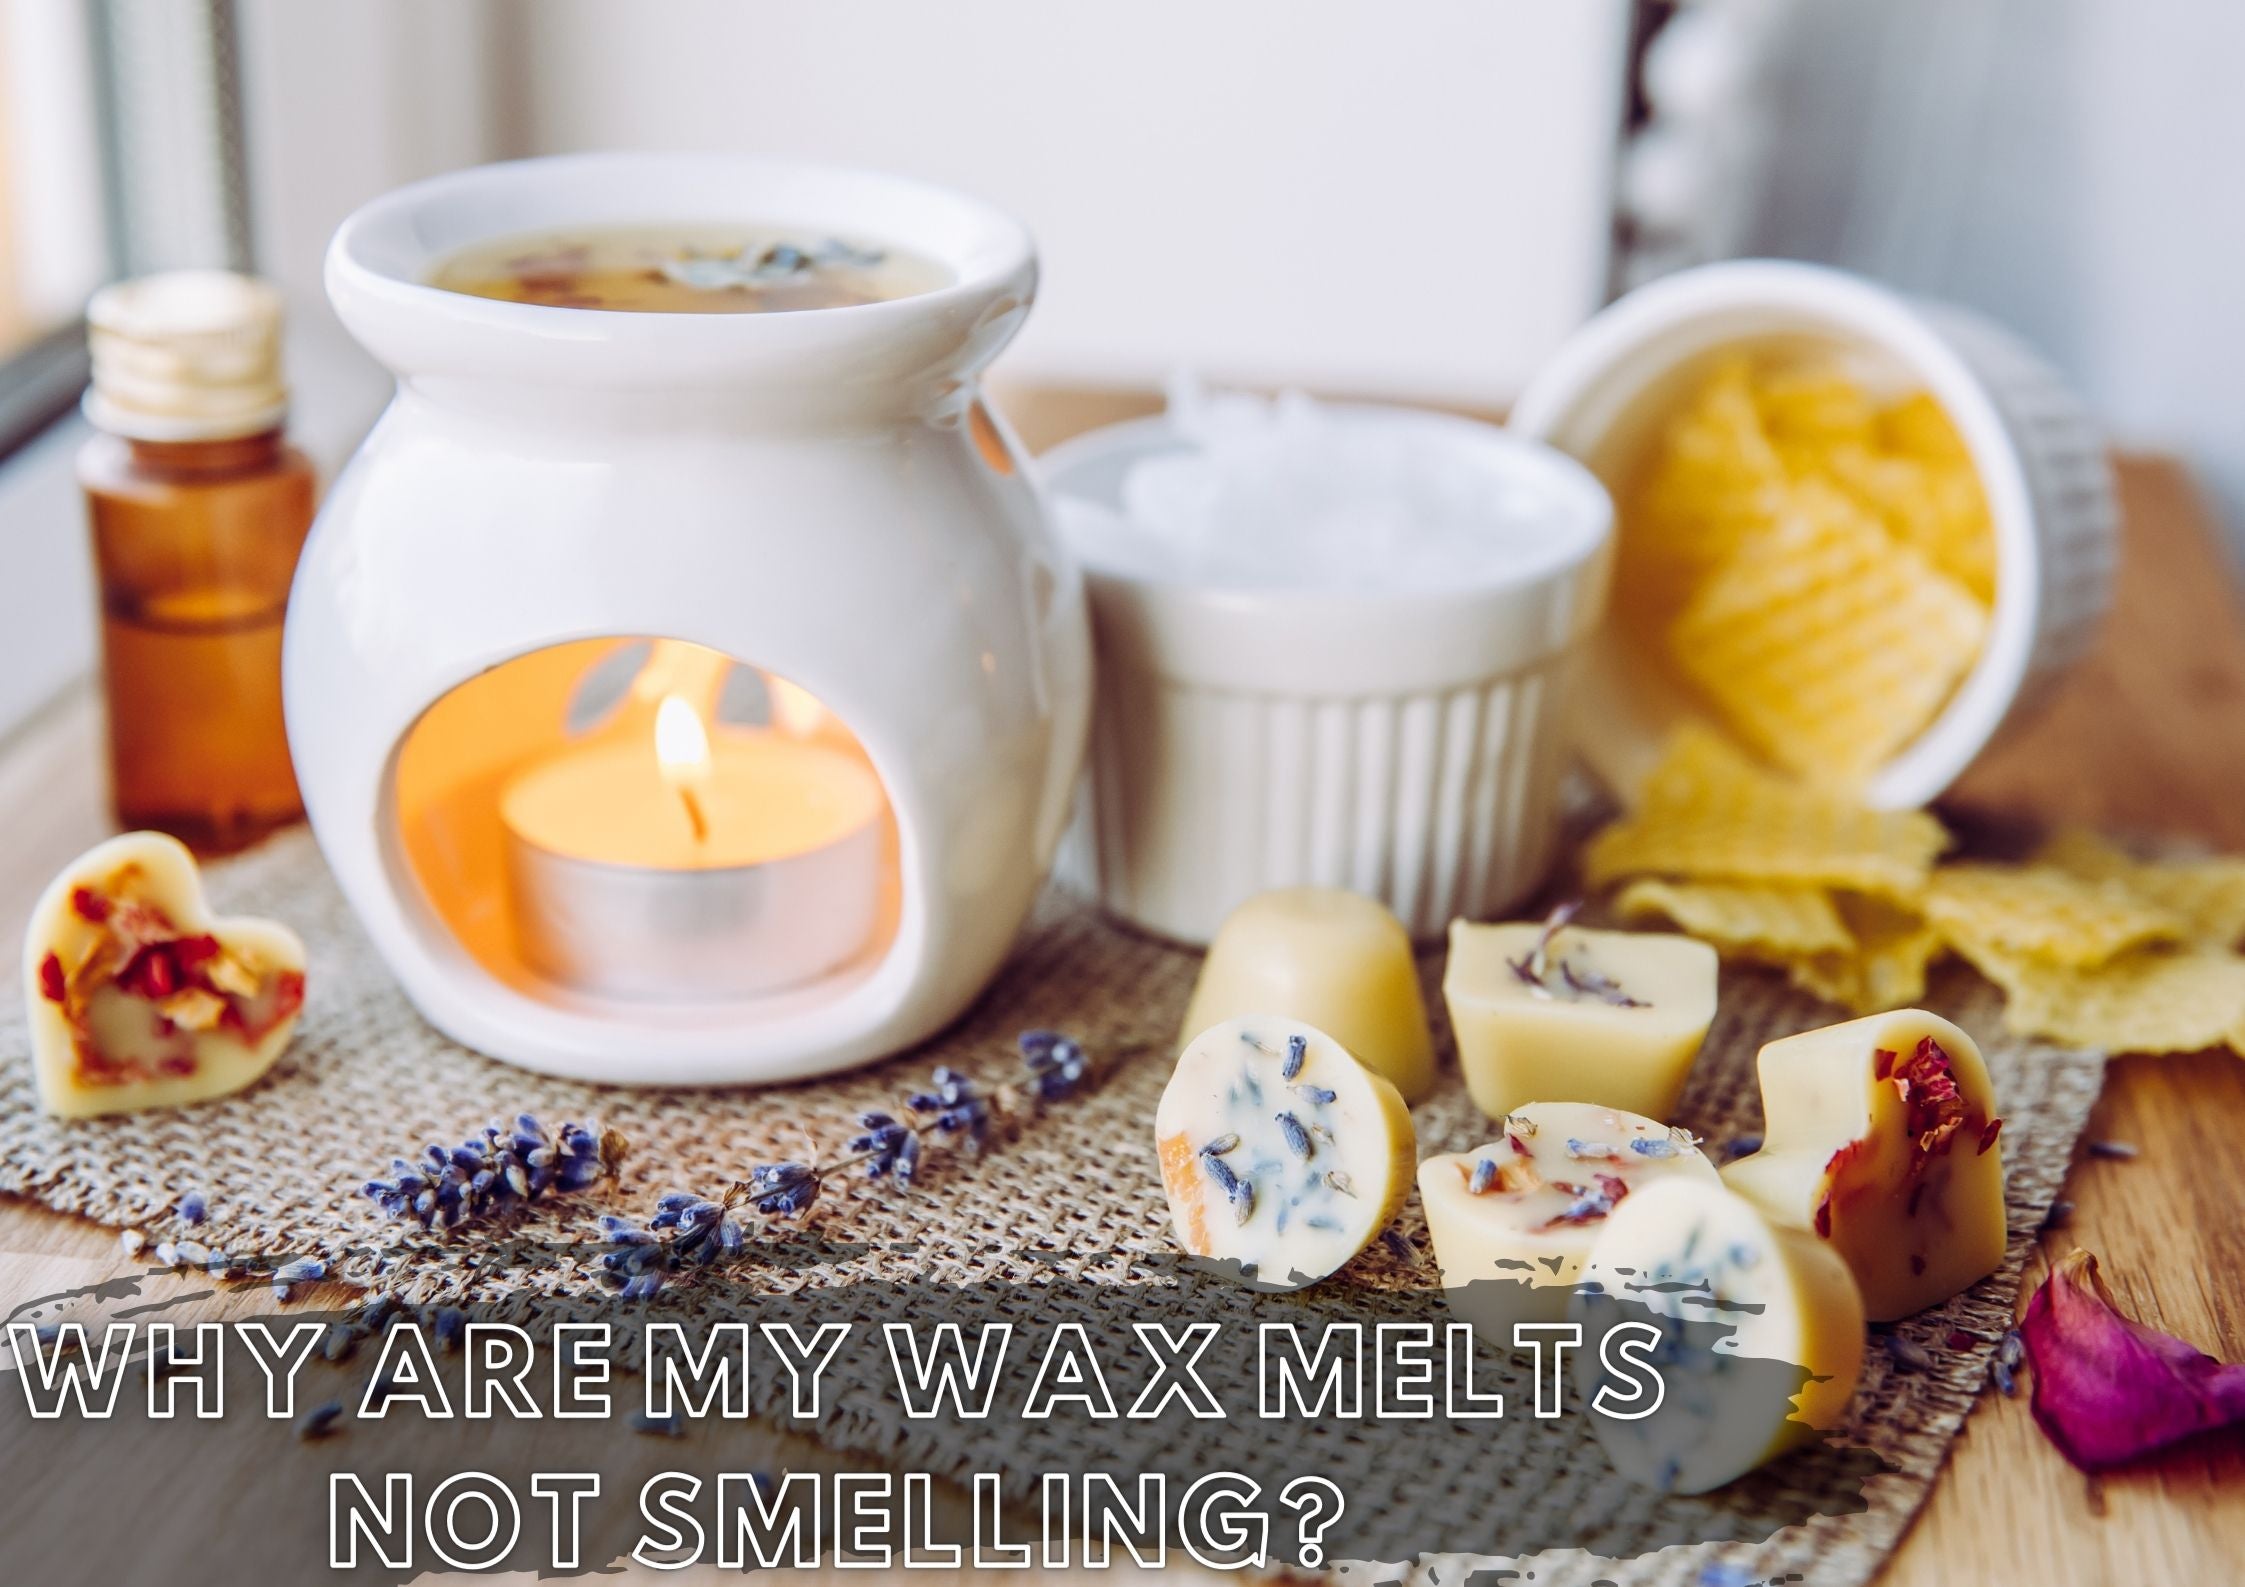 Why are my wax melts not smelling?